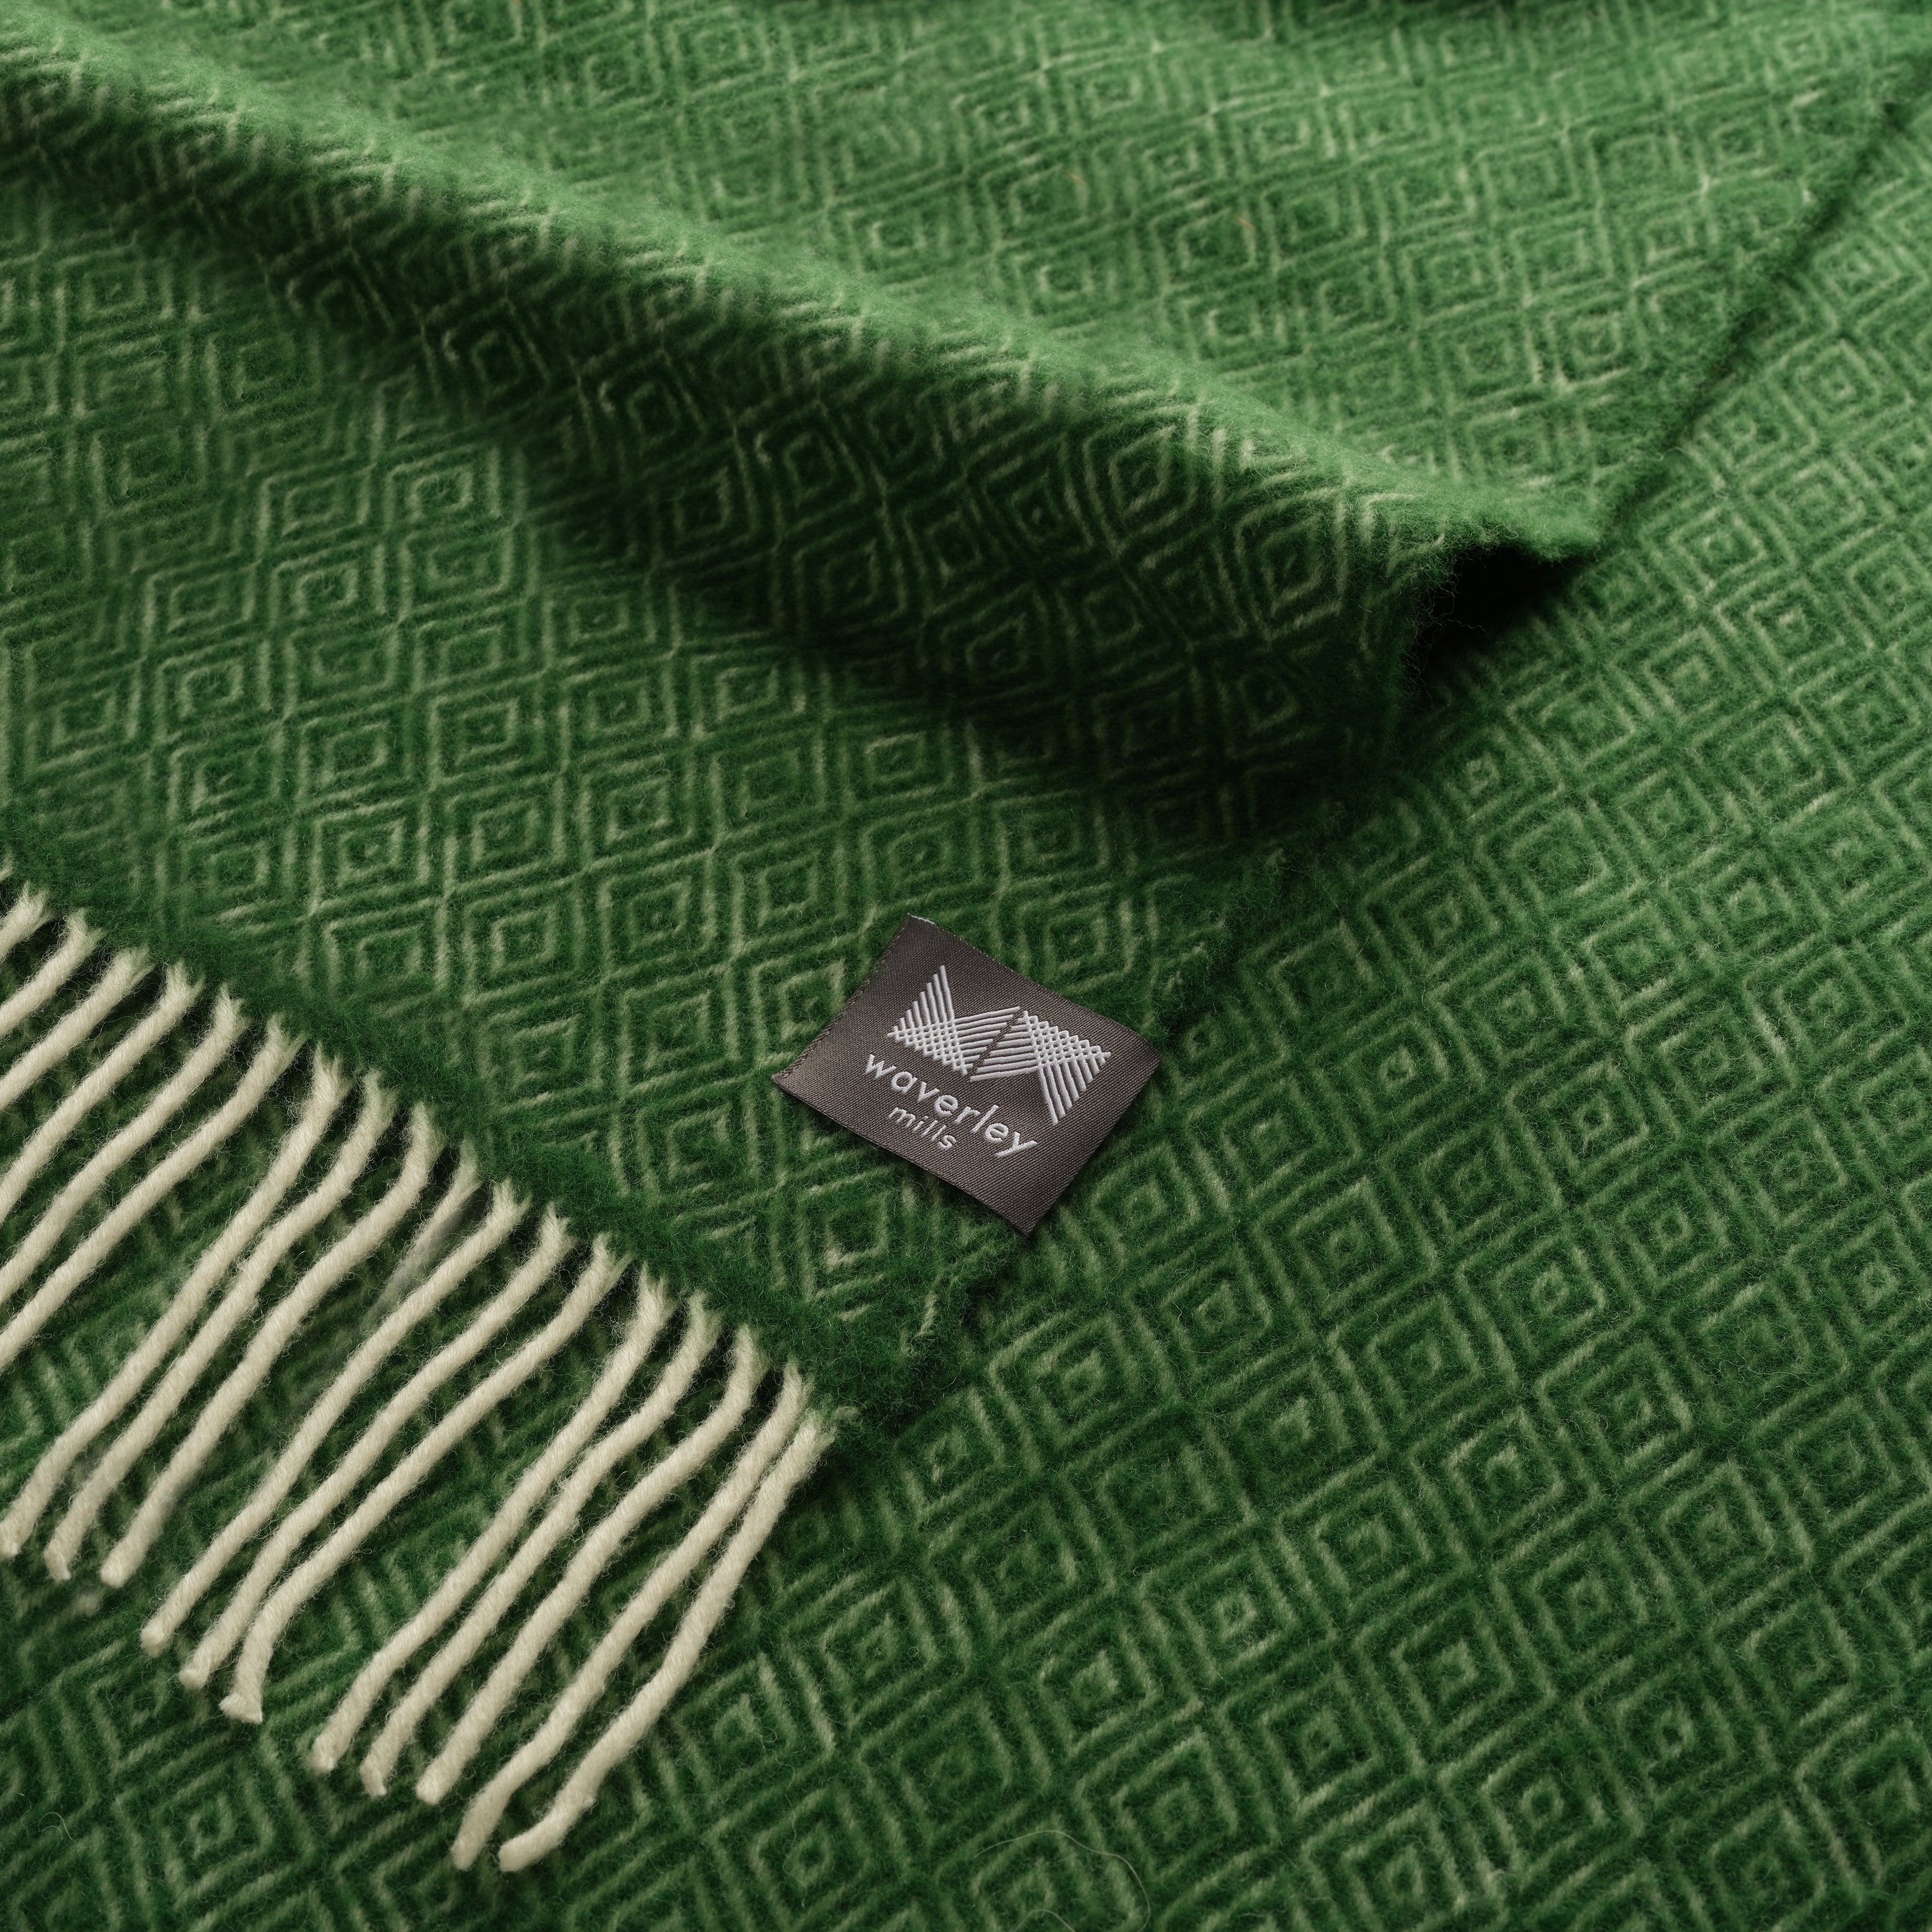 A close up of an artichoke green throw with a diamond pattern.